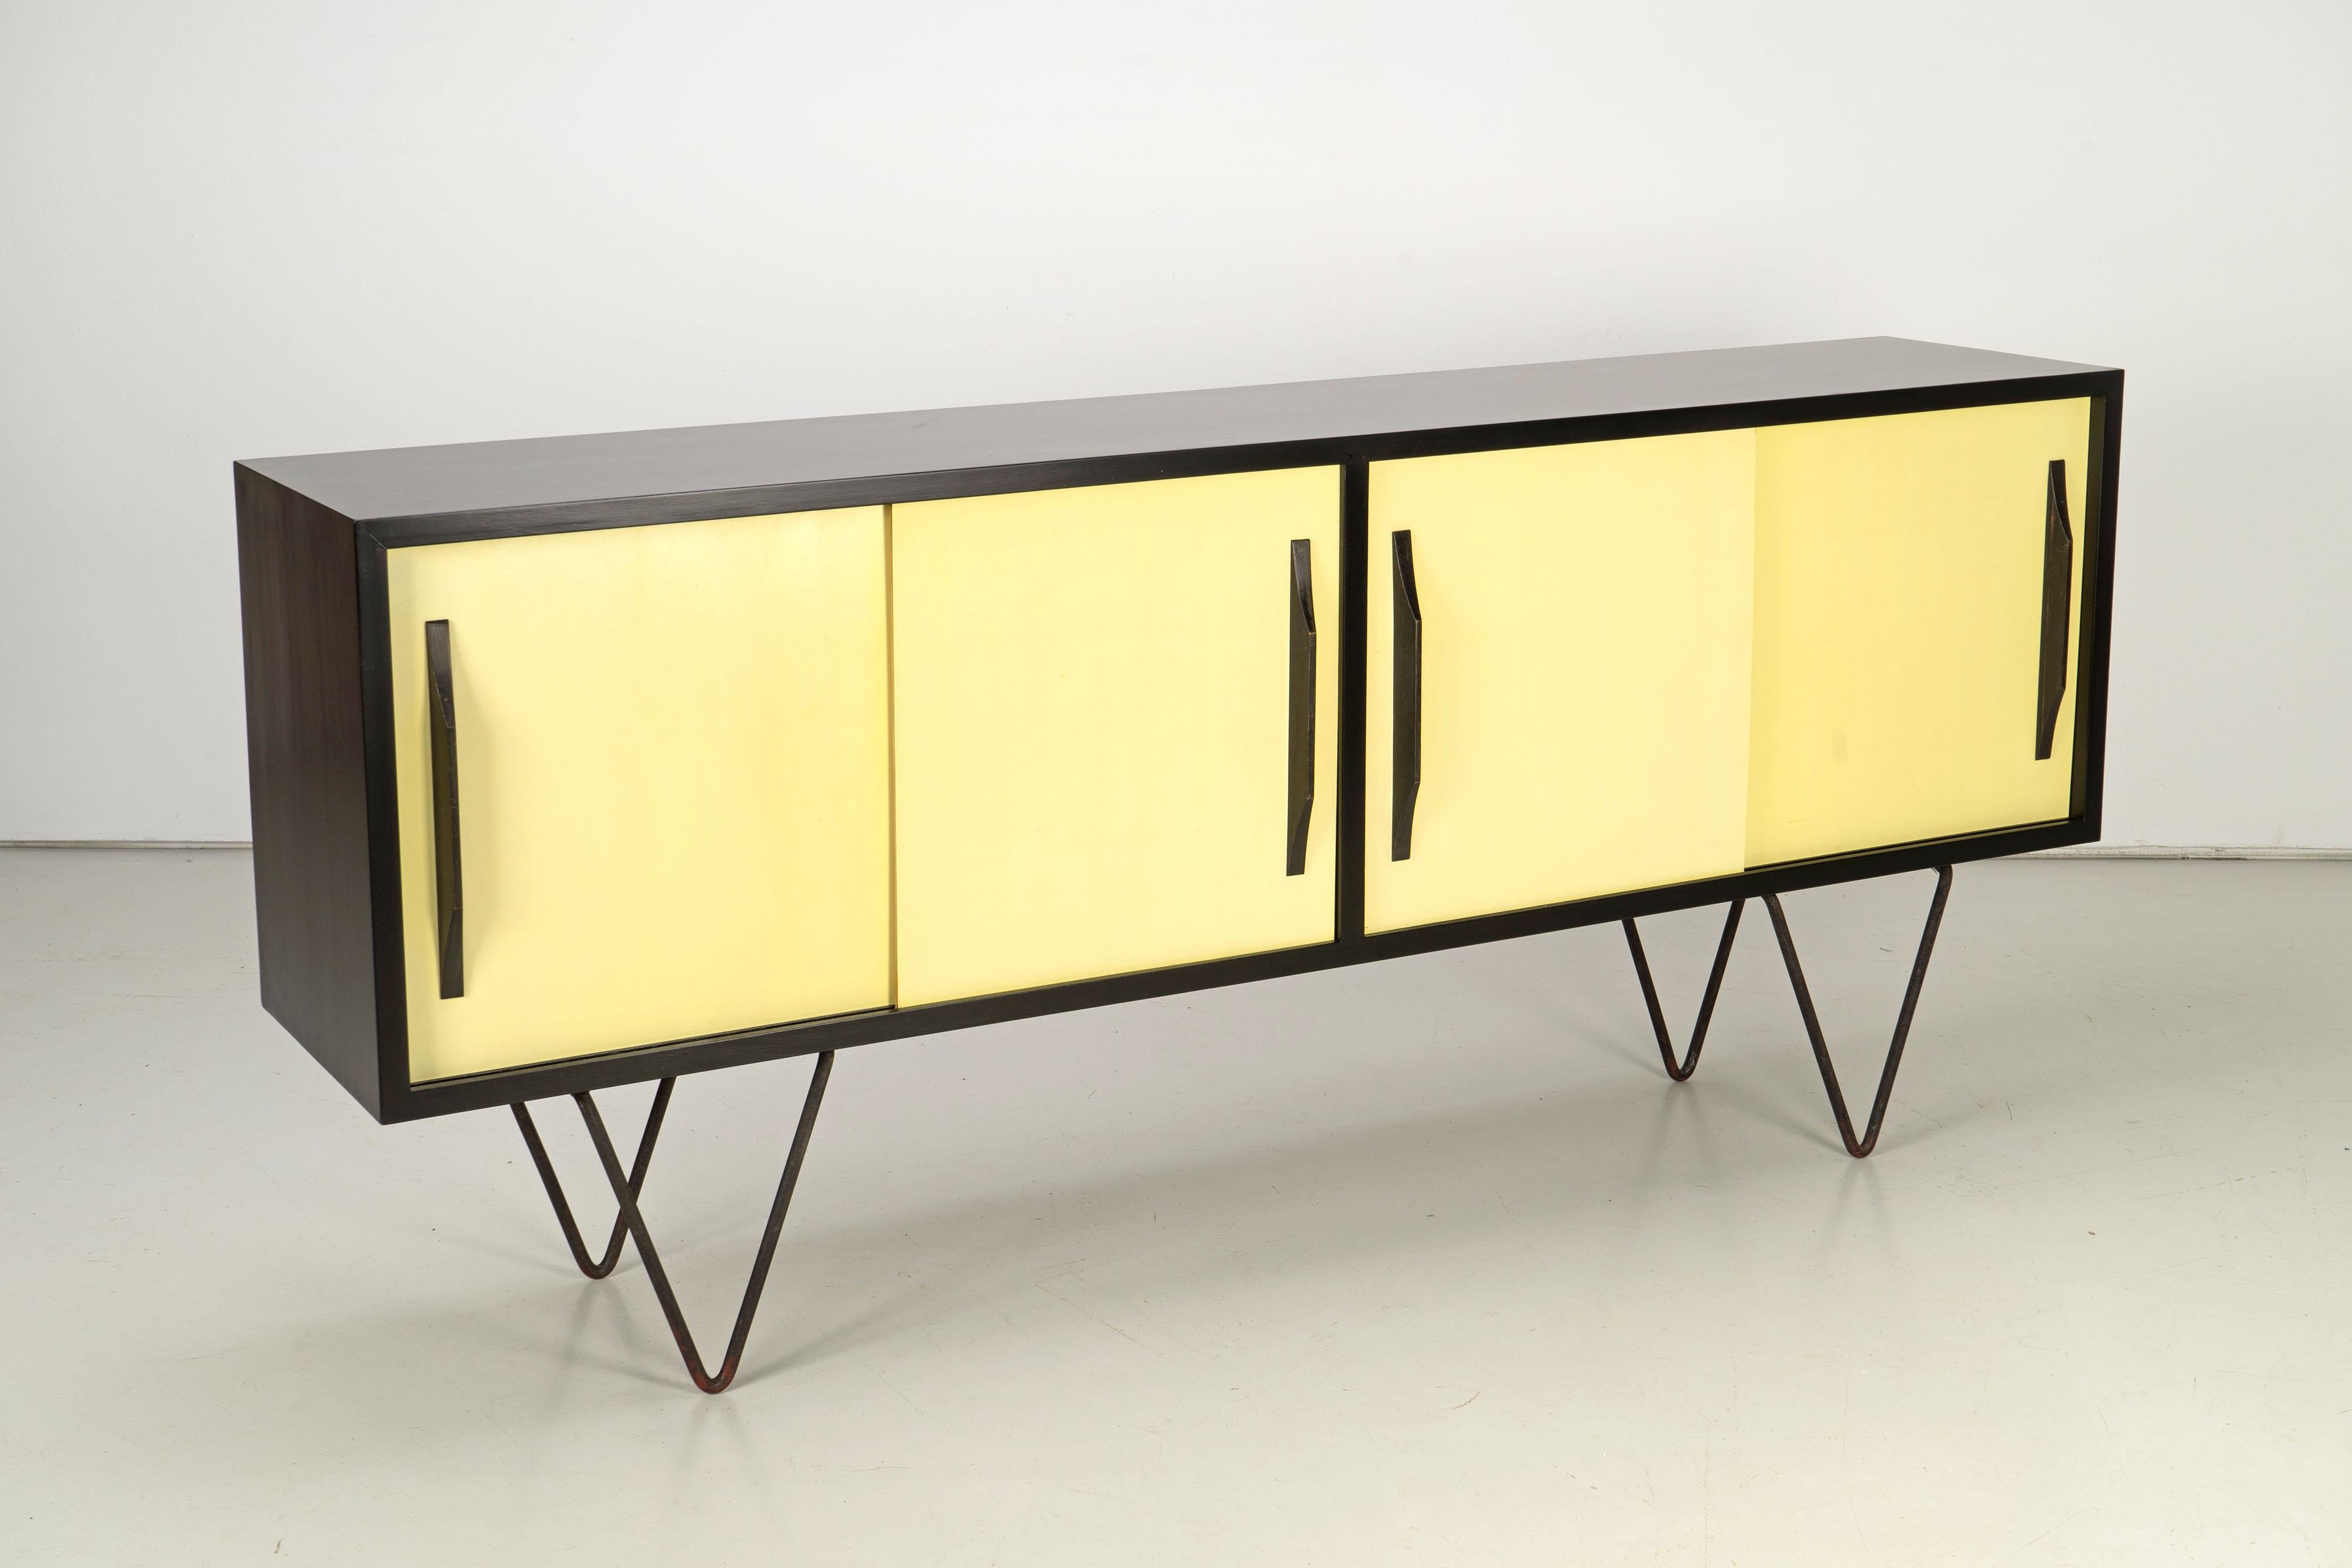 20th Century Black Mid-Century Modern Sideboard with Yellow Formica Doors, 1950s